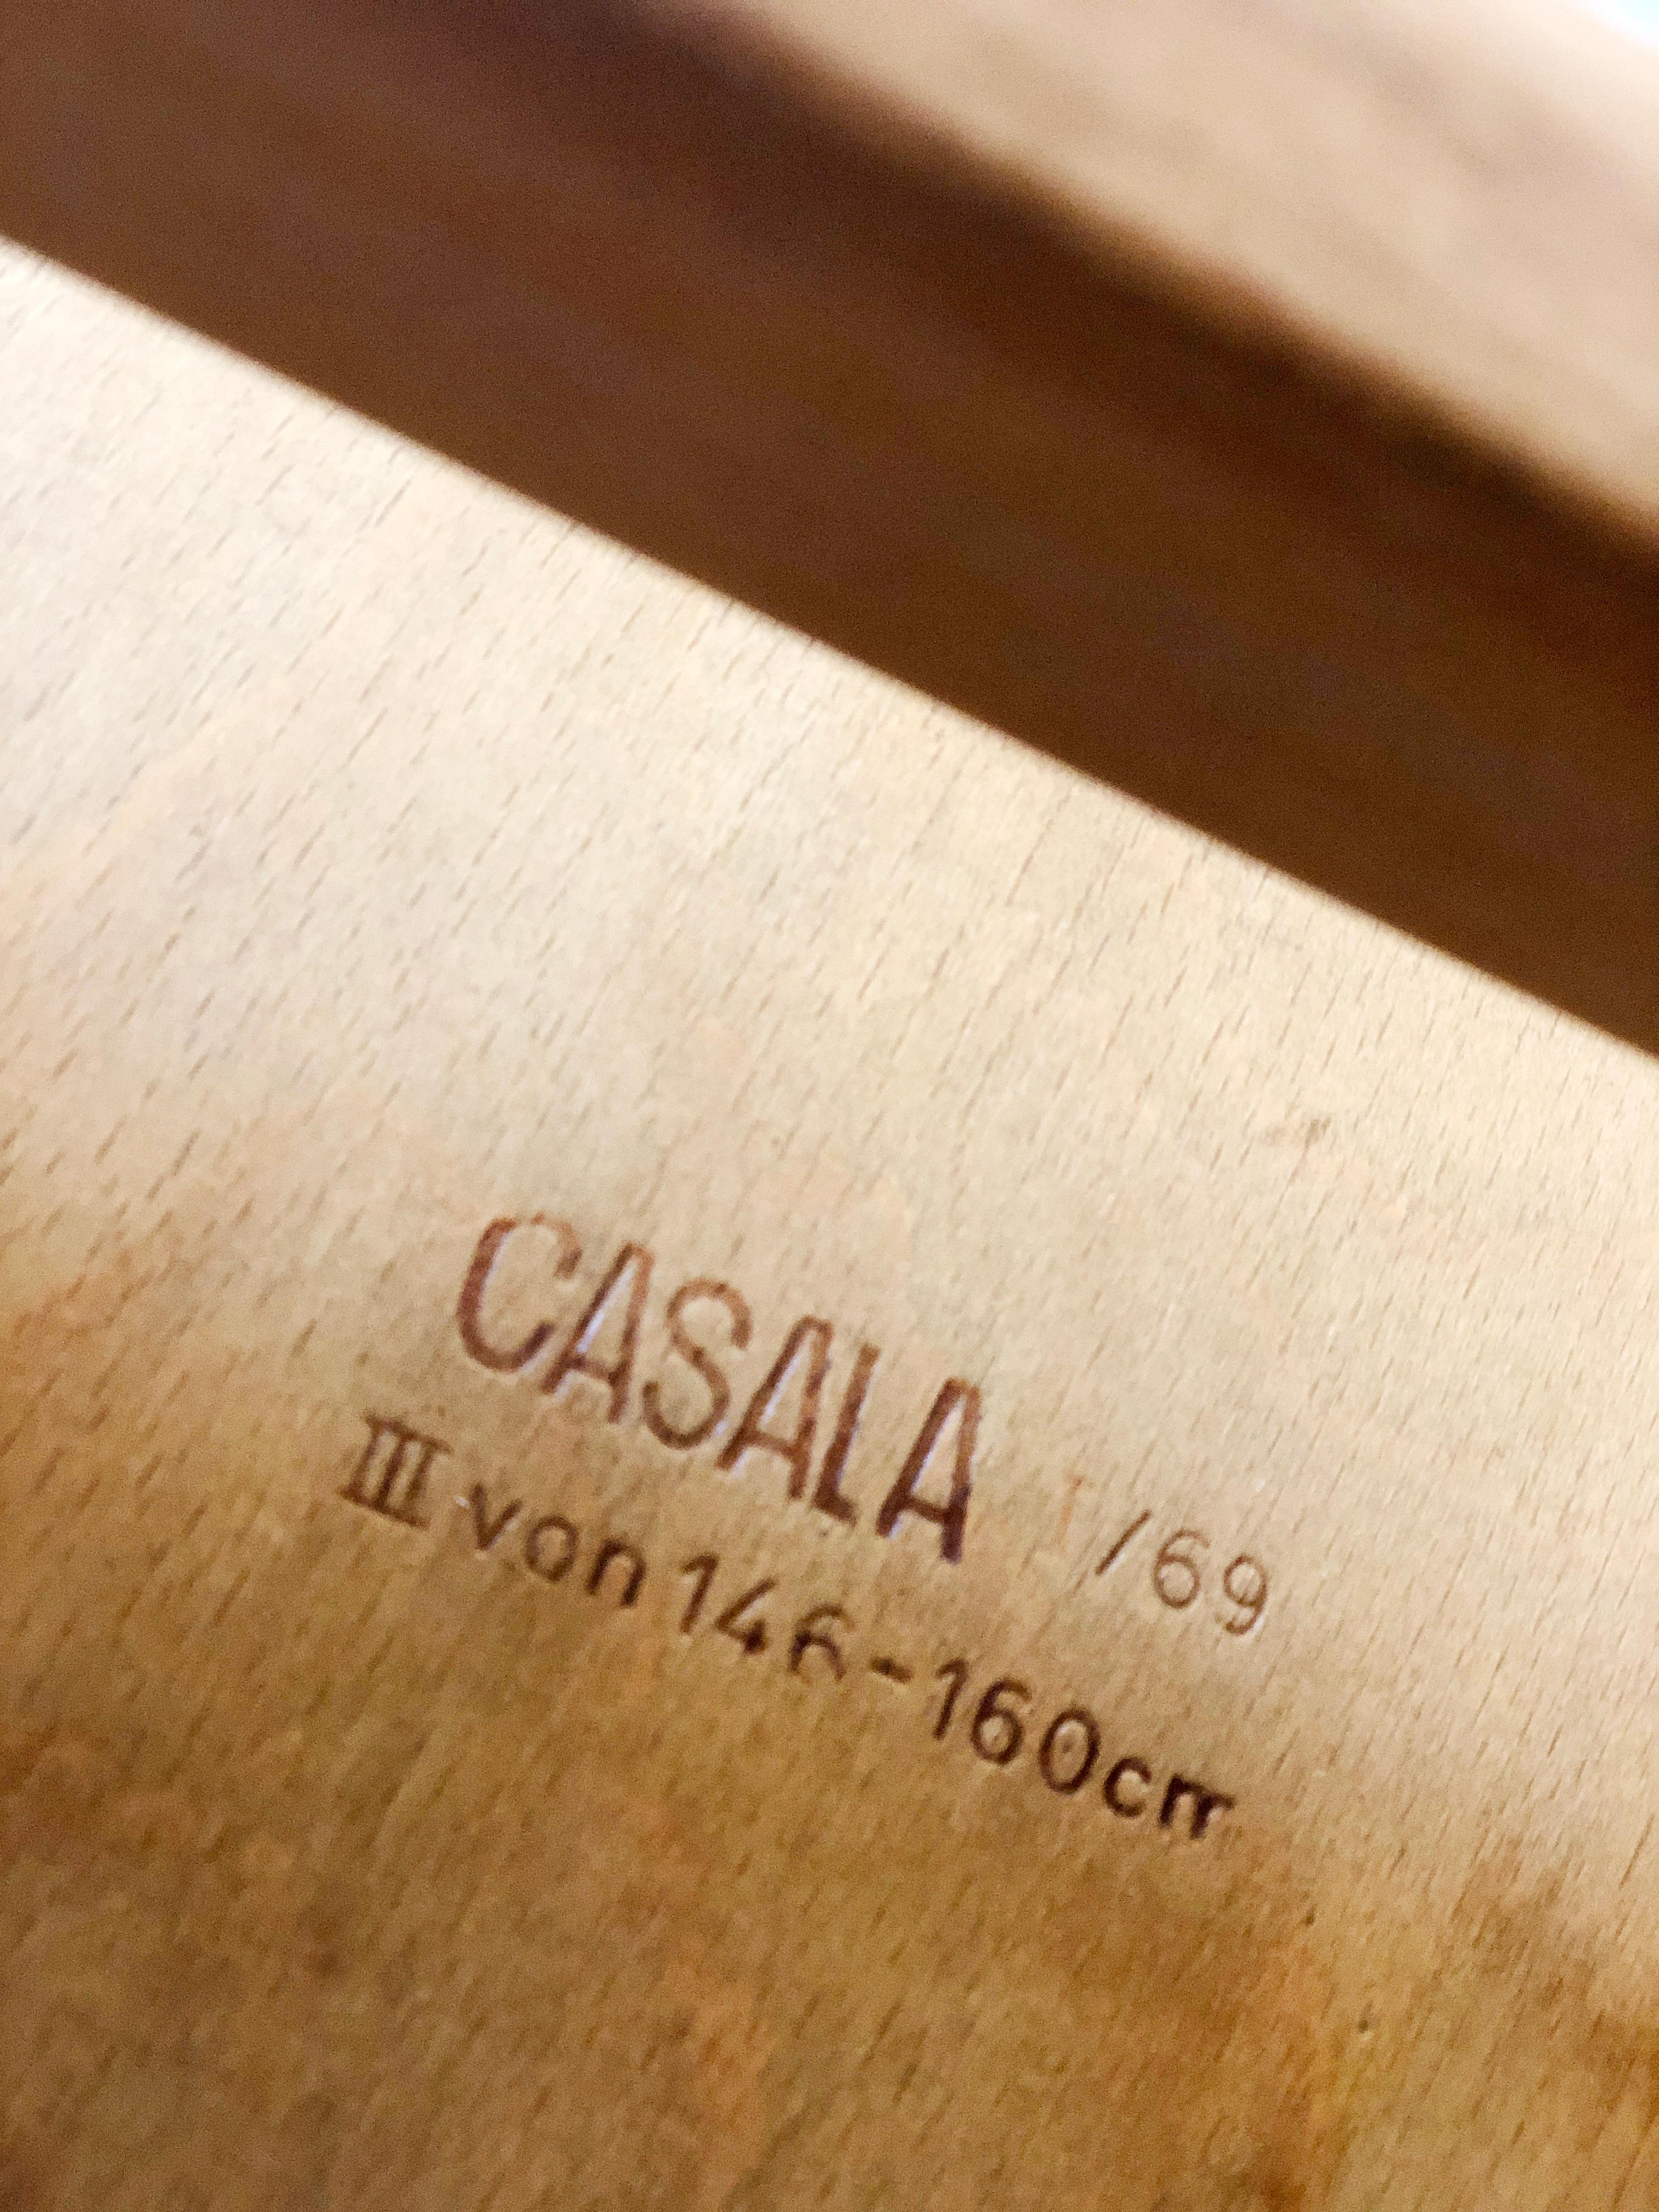 Children’s School Chair in middle-childhood. This is a classic design by Karl Nothelfer from 1967, produced by Casala (Germany). CaSaLa was founded in 1917 by CArl SAsse in LAuenau Germany. Chair is in good original condition with beautiful patina. 